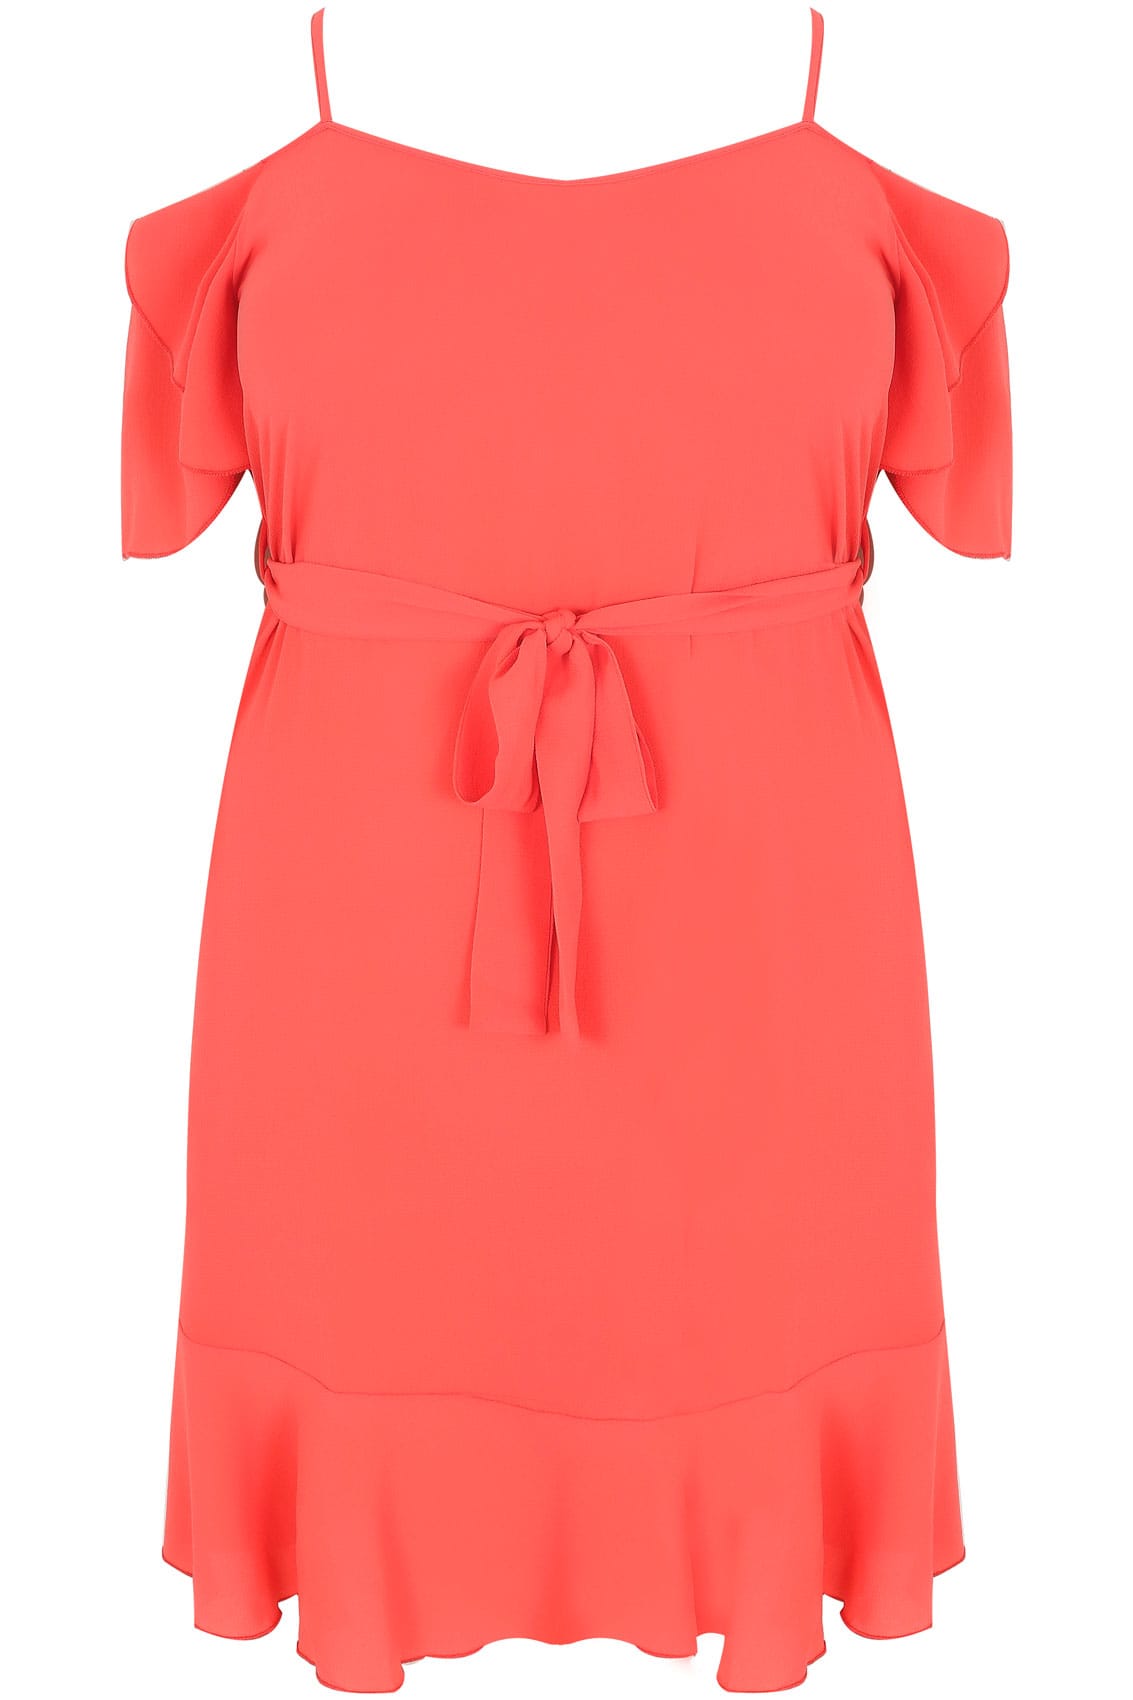 Coral Cold Shoulder Swing Dress With Frill Hem, Plus size 16 to 36